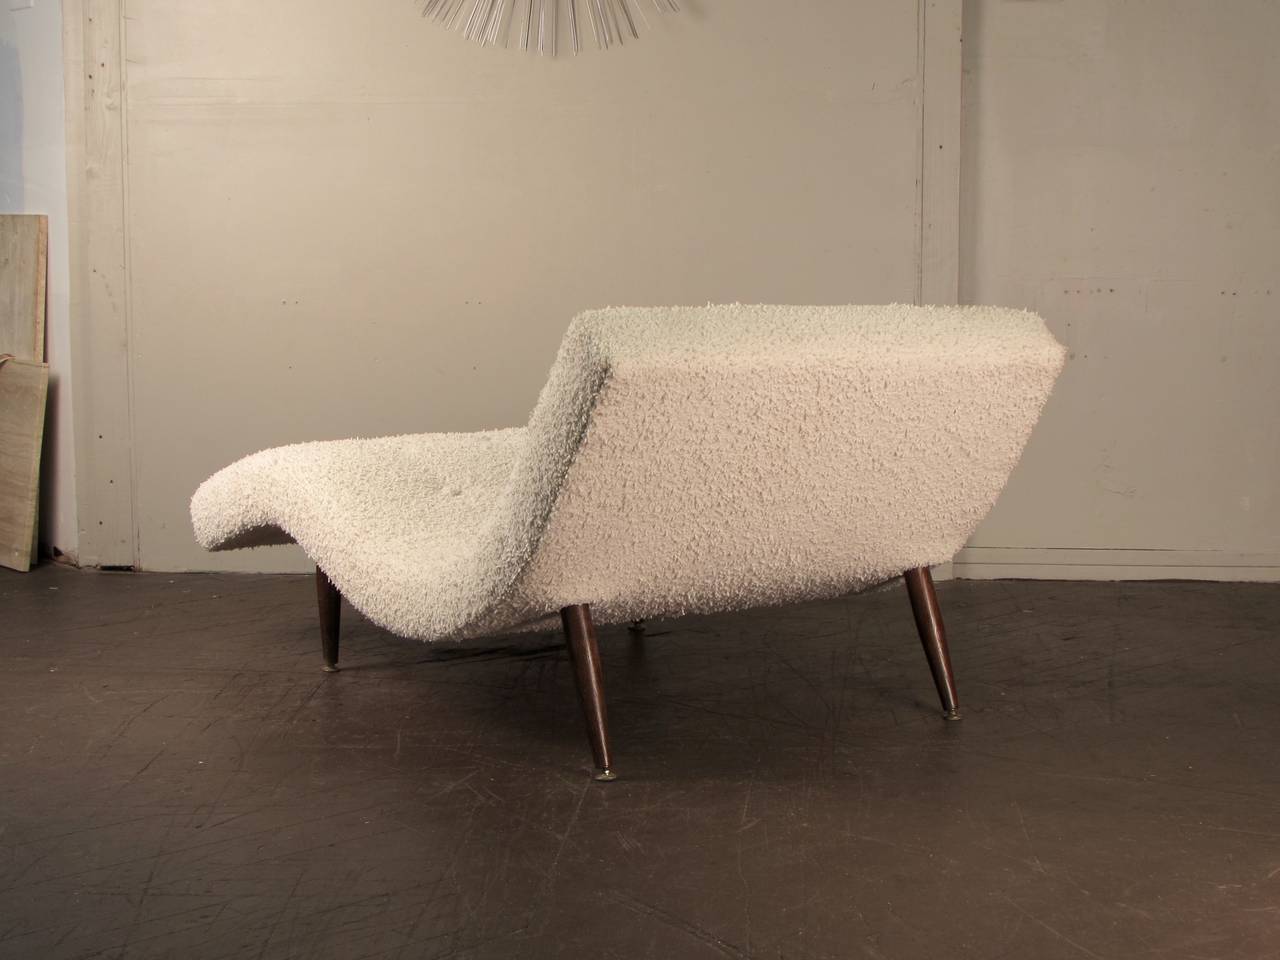 adrian pearsall wave chaise